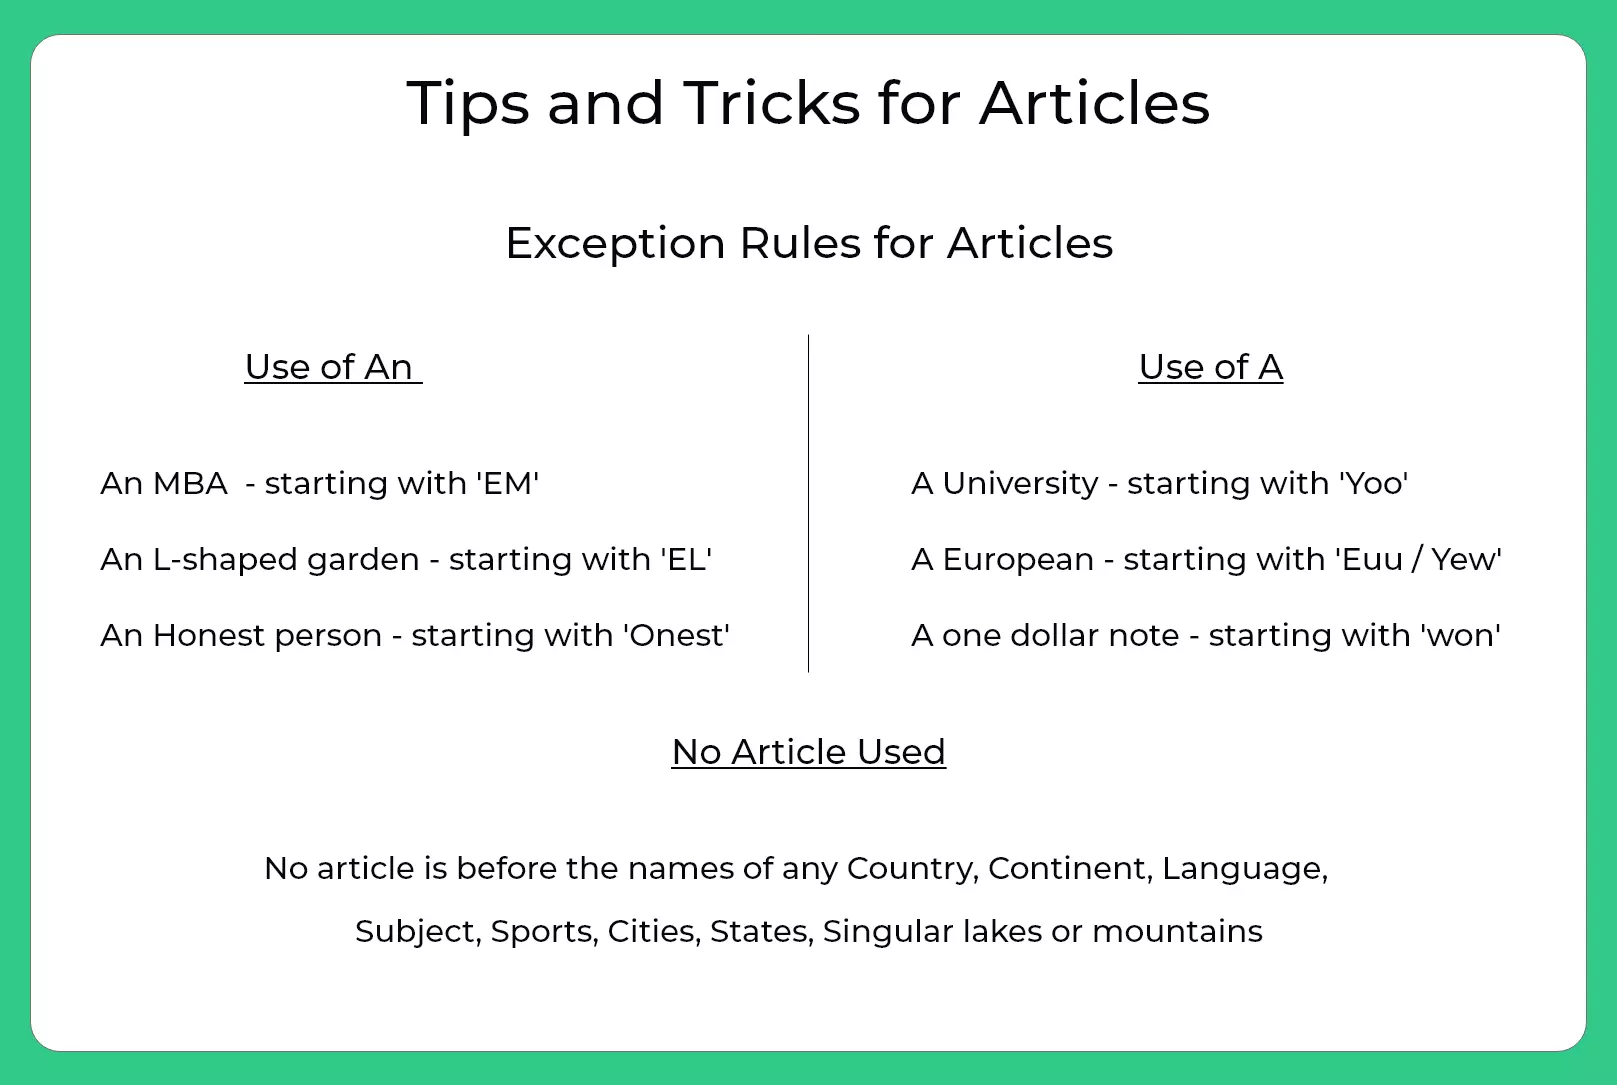 Tips and Tricks for Articles